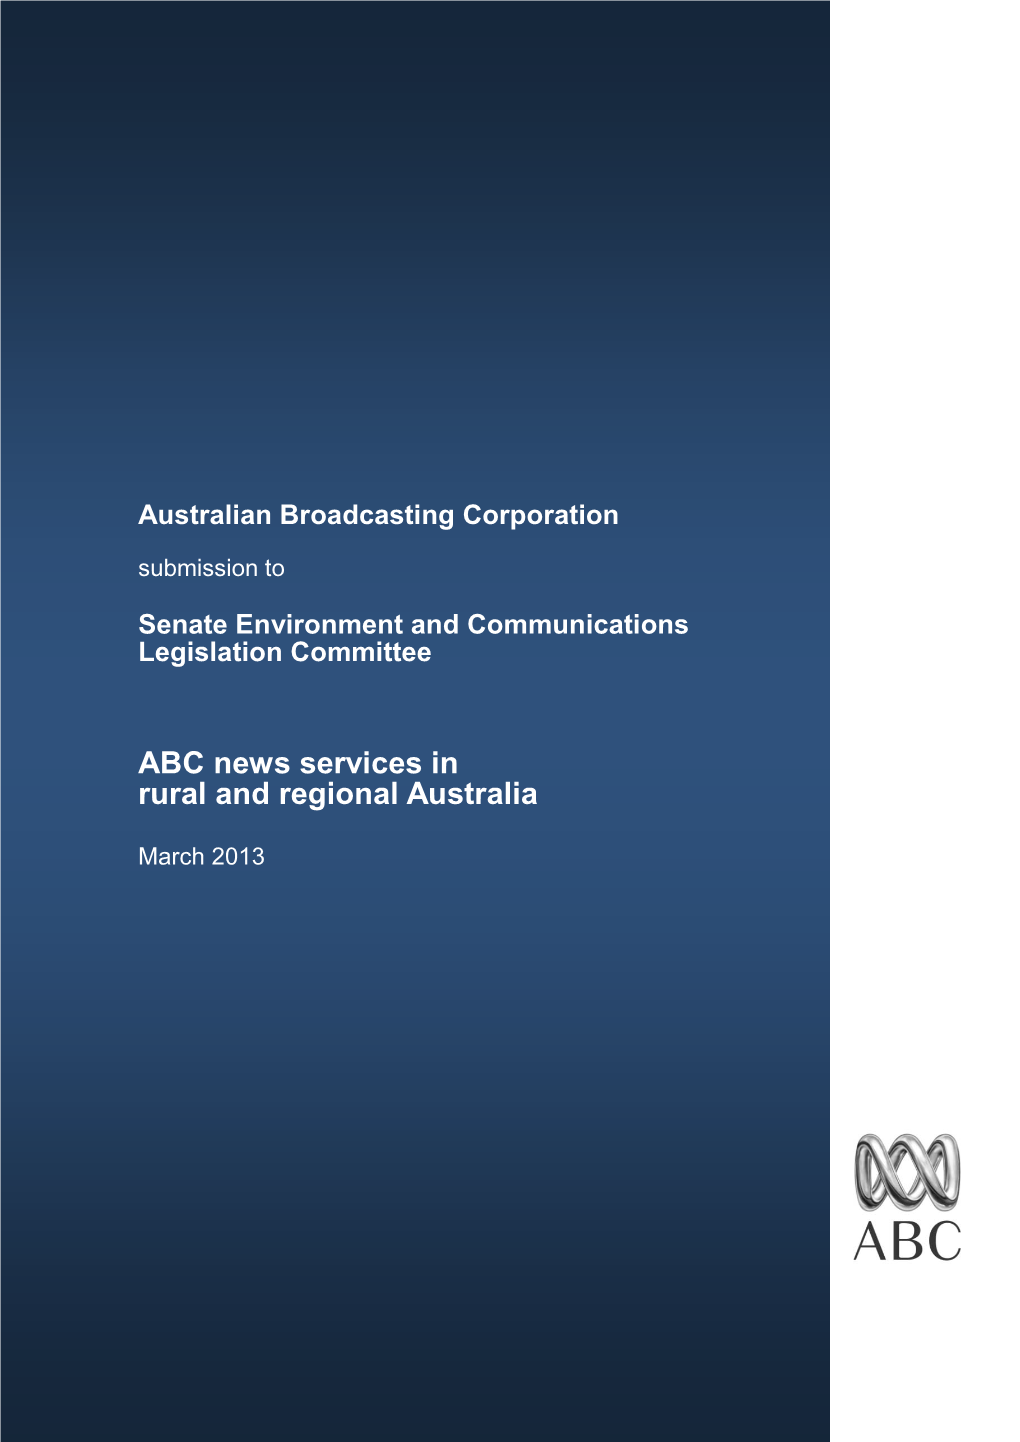 ABC News Services in Rural and Regional Australia